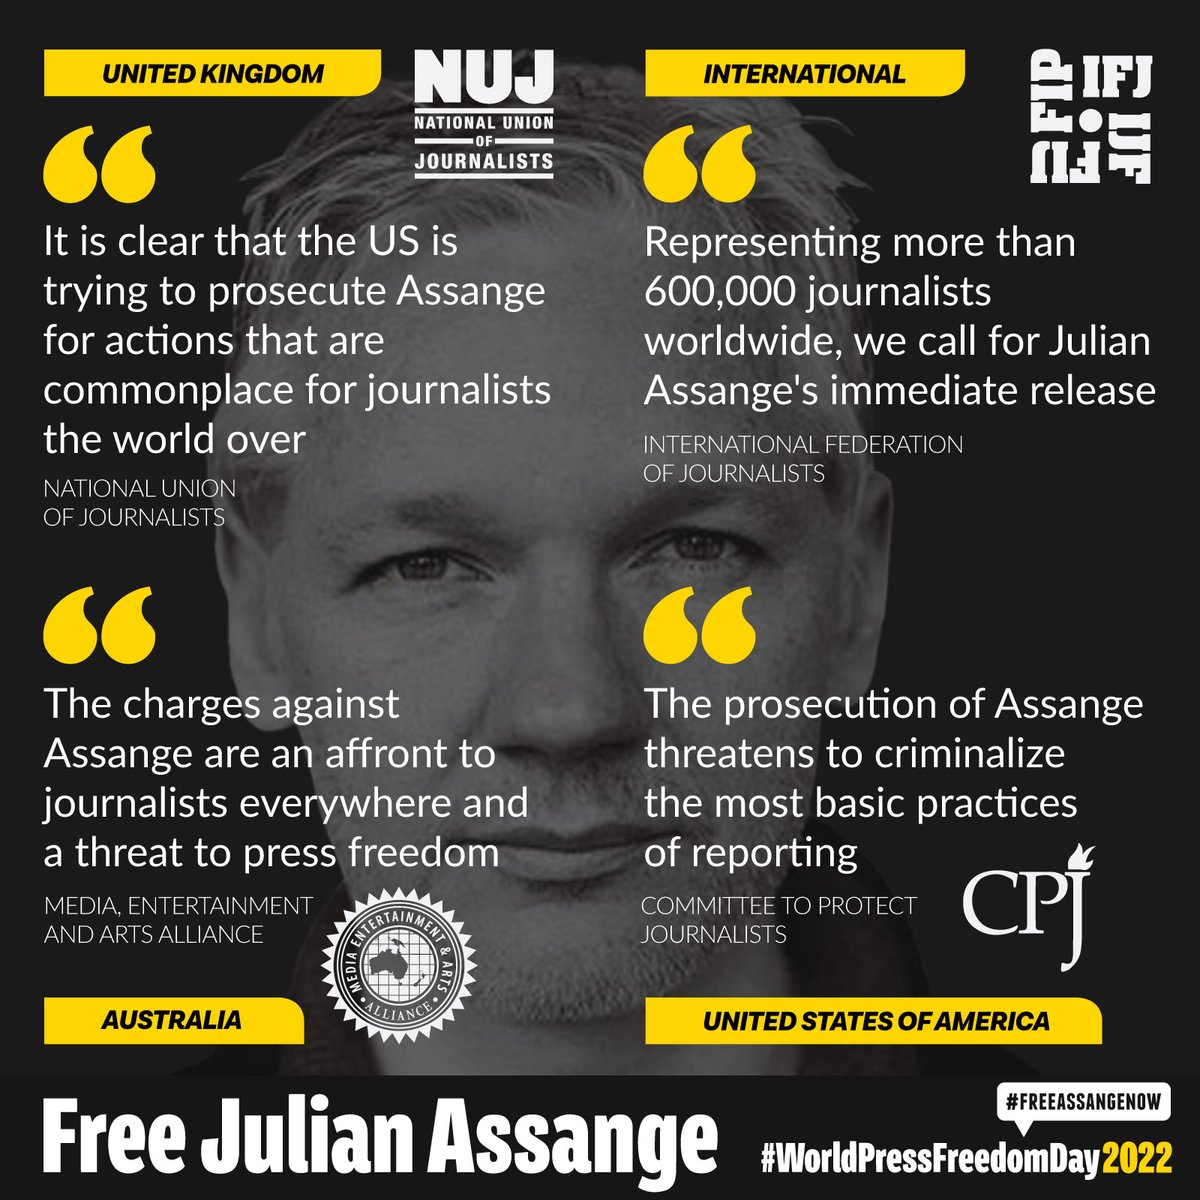 Across the world press freedom orgs oppose the extradition of Julian Assange - facing a 175 year sentence if extradited for publishing truthful information in the pubic interest #FreeAssangeNOW #WorldPressFreedomDay #WPFD2022 @NUJofficial @IFJGlobal
@withMEAA @pressfreedom